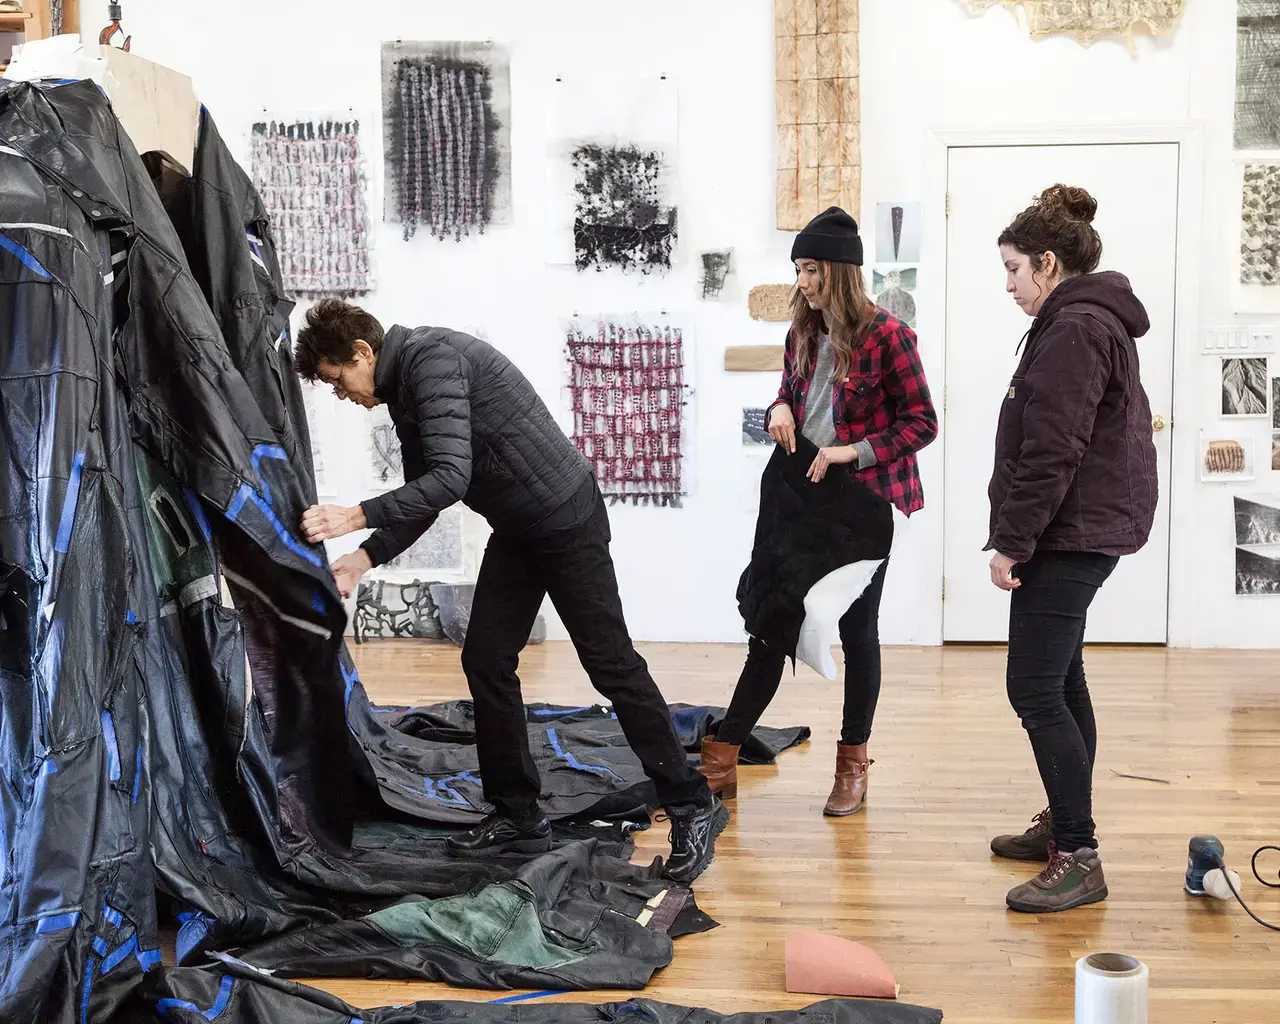 The Fabric Workshop and Museum, artist-in-residence Ursula von Rydingsvard; studio staff member Paige Fetchen, and Ursula von Rydingsvard studio staff member Morgan Daly work on "PODERWAĆ," 2017. Photo by Carlos Avendaño.